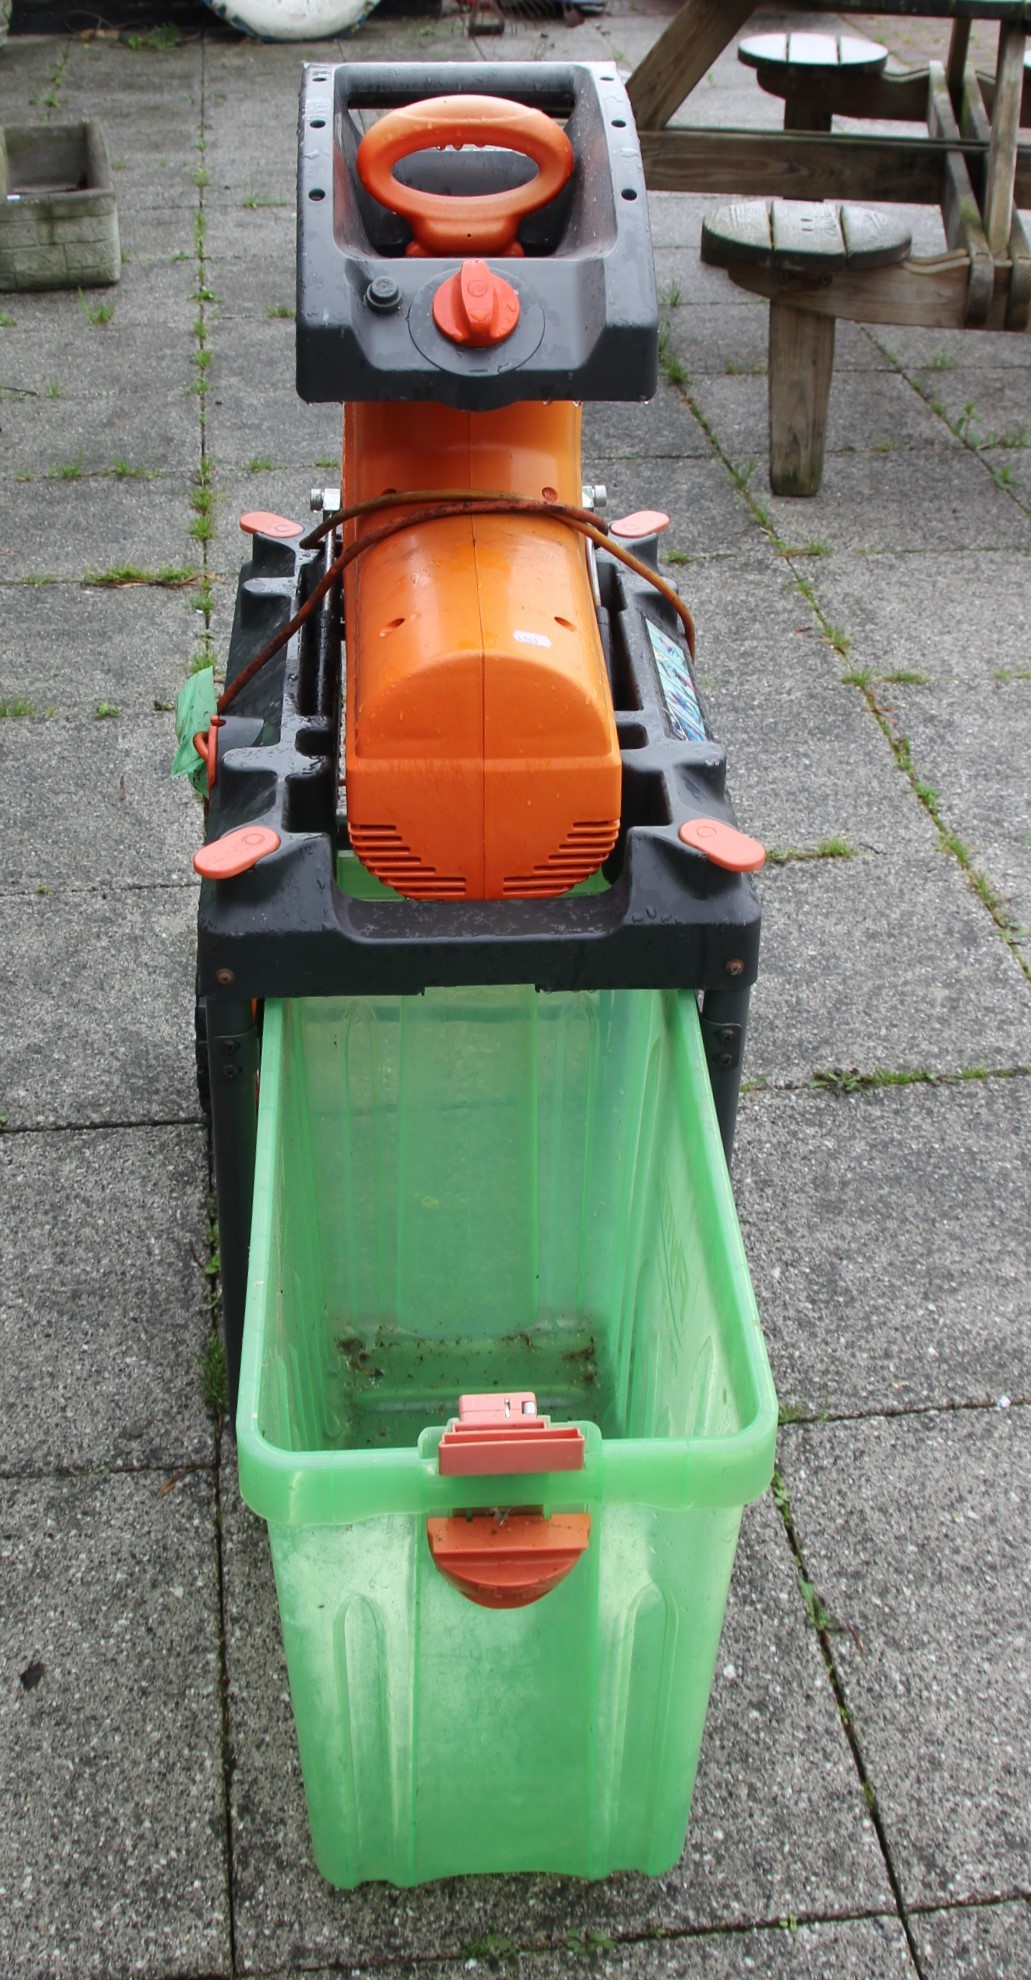 A Flymo Pac a Shredder (PAS2500) garden shredder, untested sold as seen - Image 2 of 4